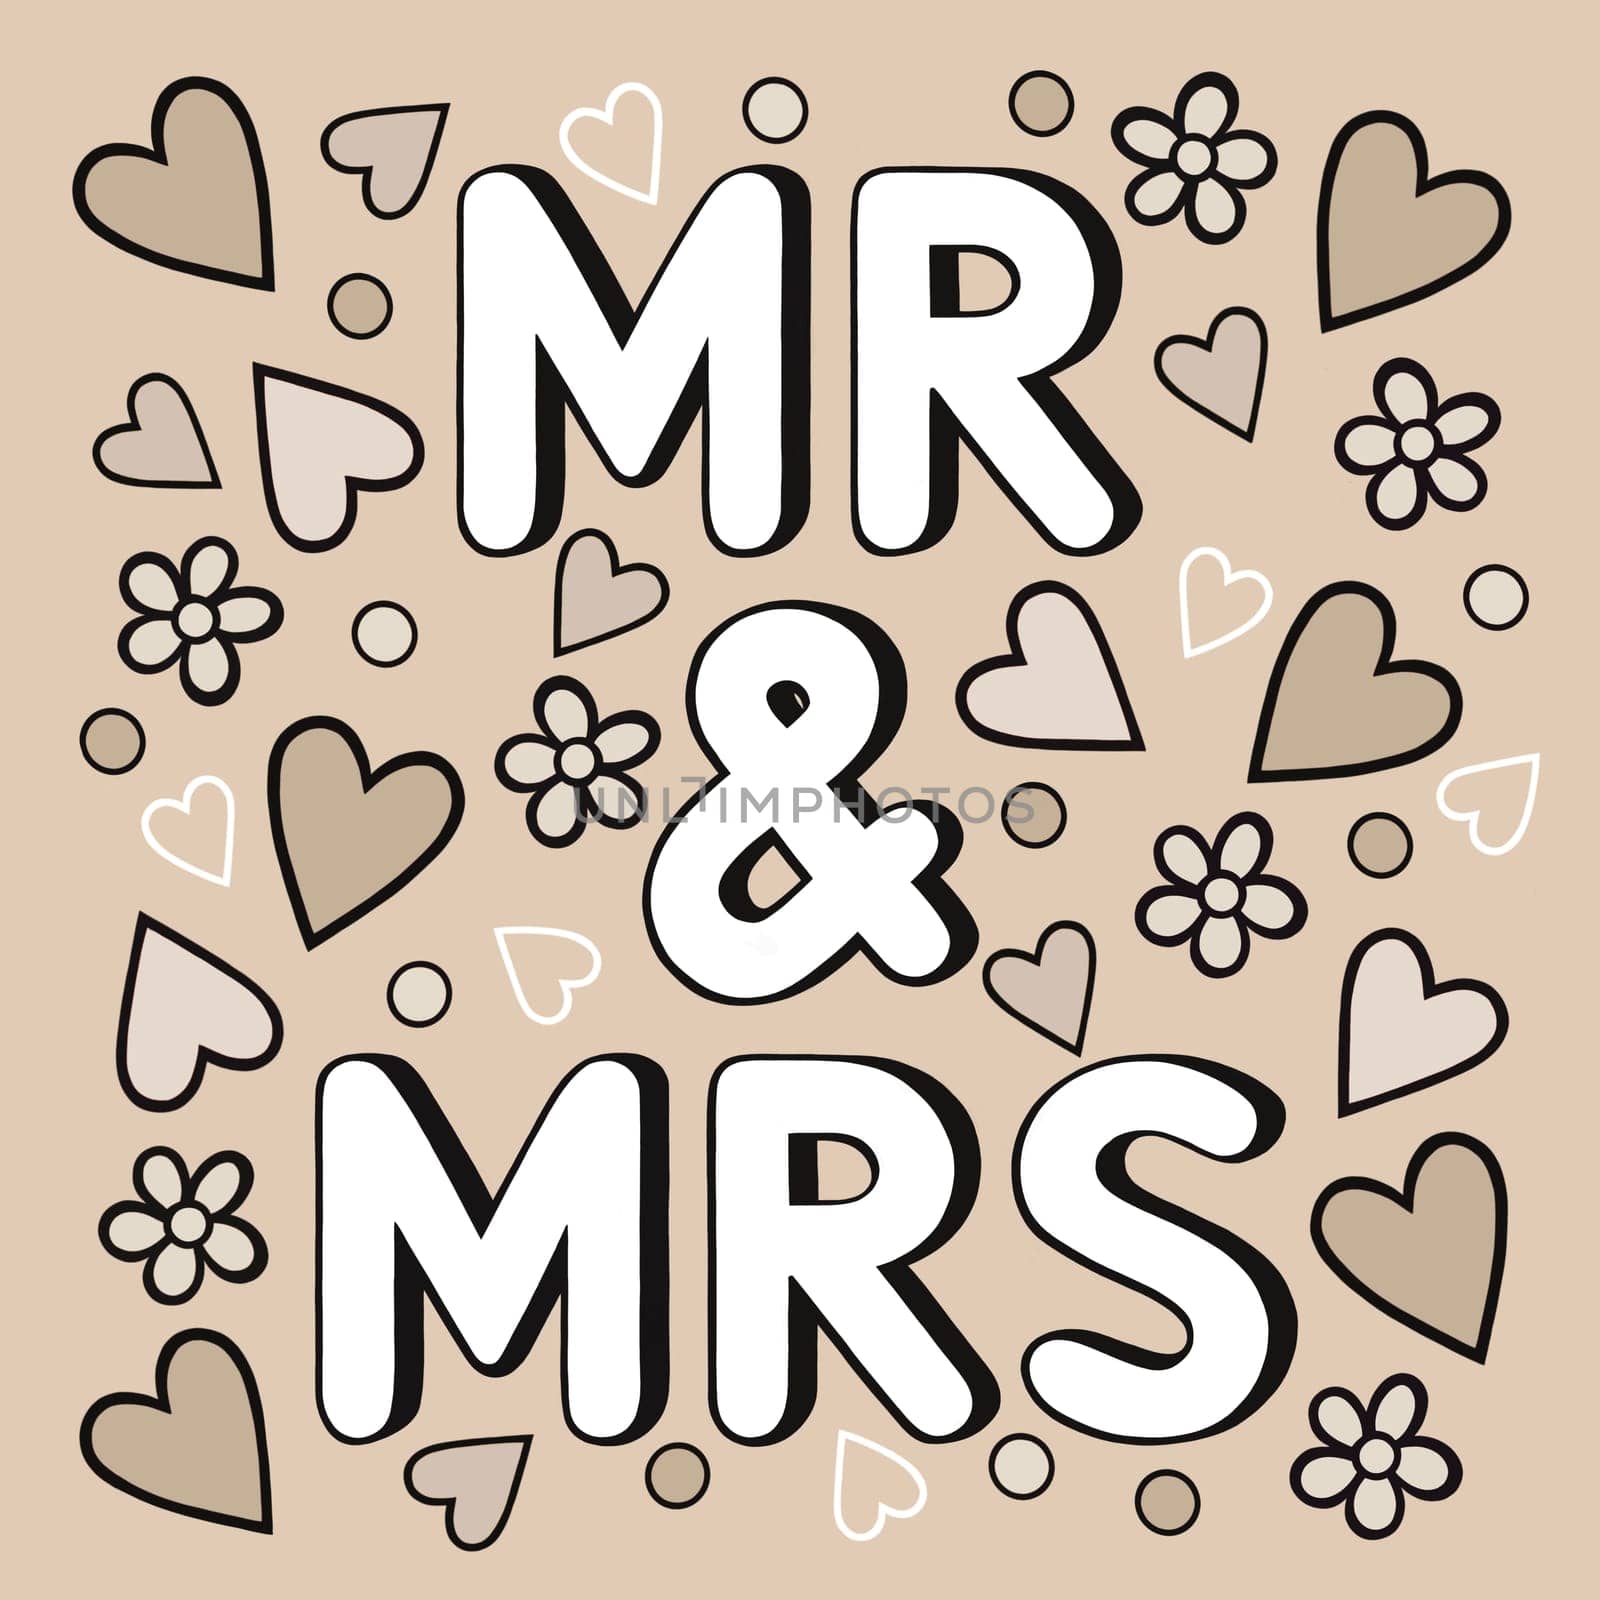 Wedding sign in a quirky, contemporary, cartoon style. Mr and Mrs text in white on a neutral beige background. Design contains hearts and flower confetti floating down round the word art. Modern artwork.